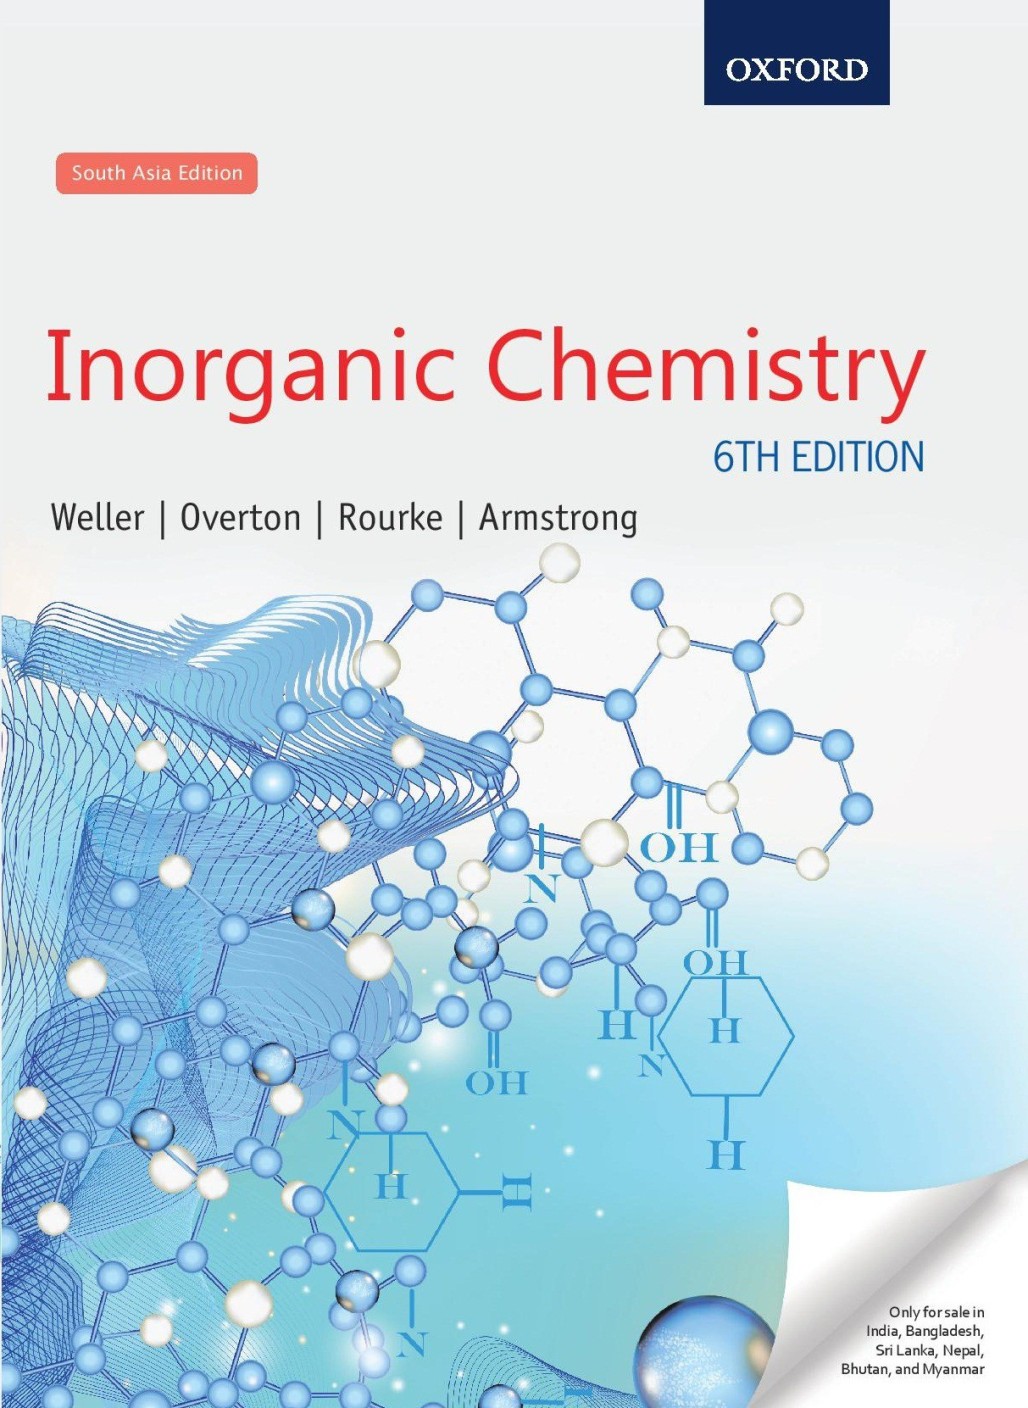 research paper in inorganic chemistry